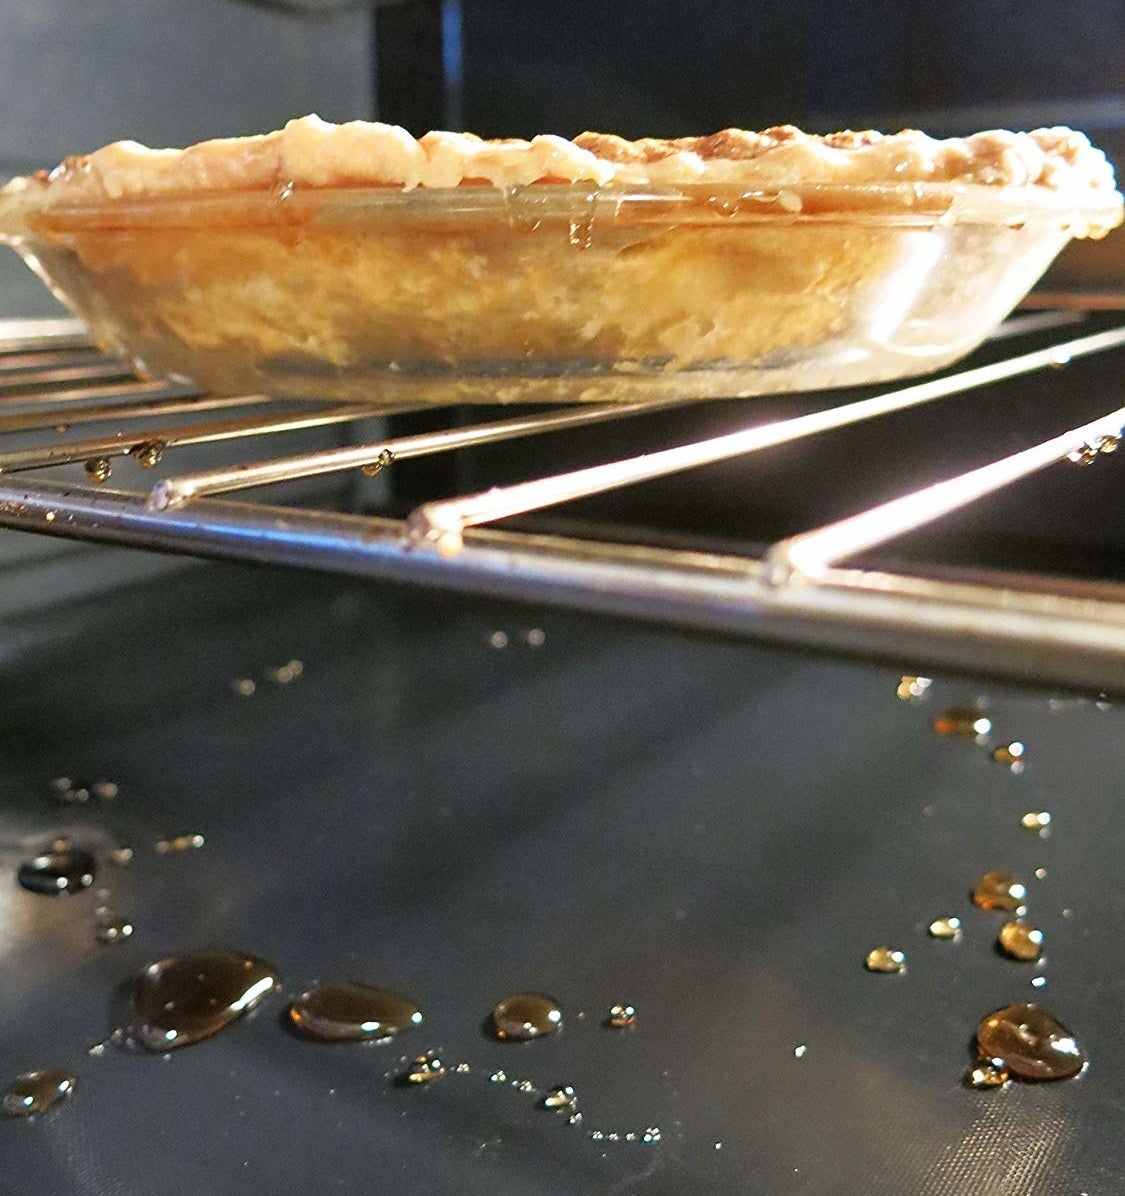 Pie dripping onto oven liners 